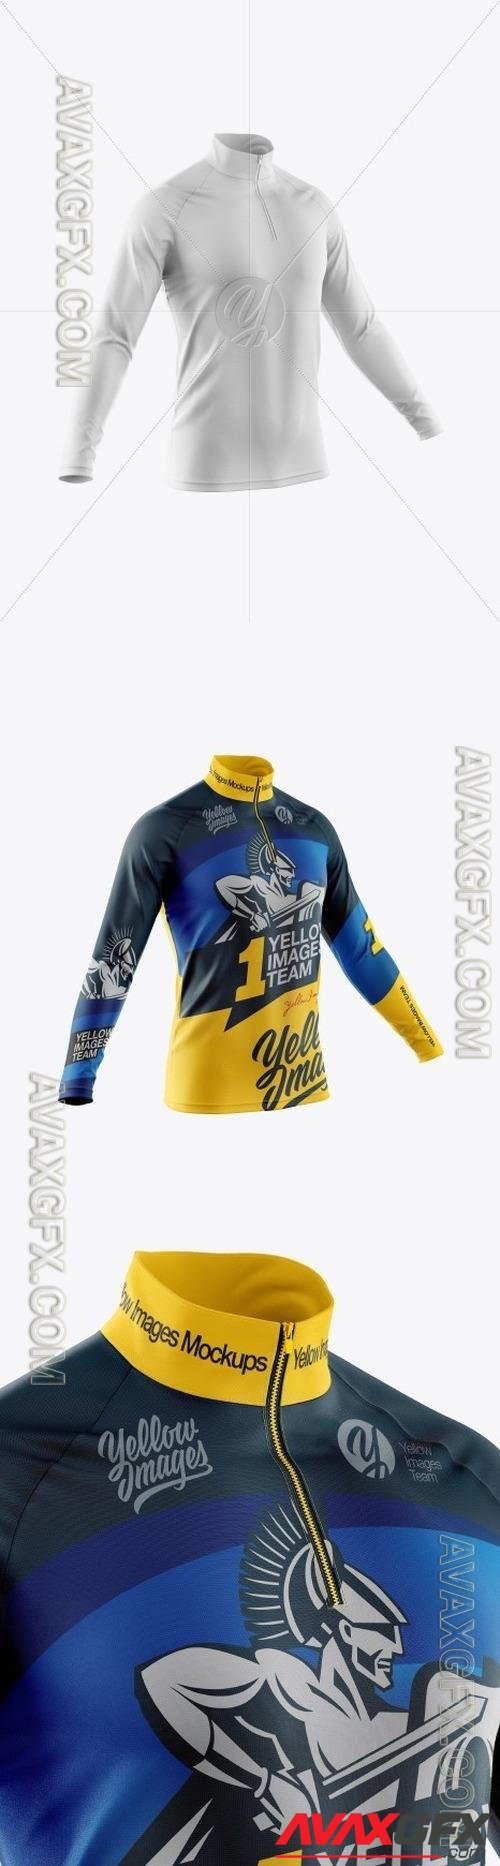 Men's Cycling Jersey With Long Sleeve Mockup - Half Side View 32975